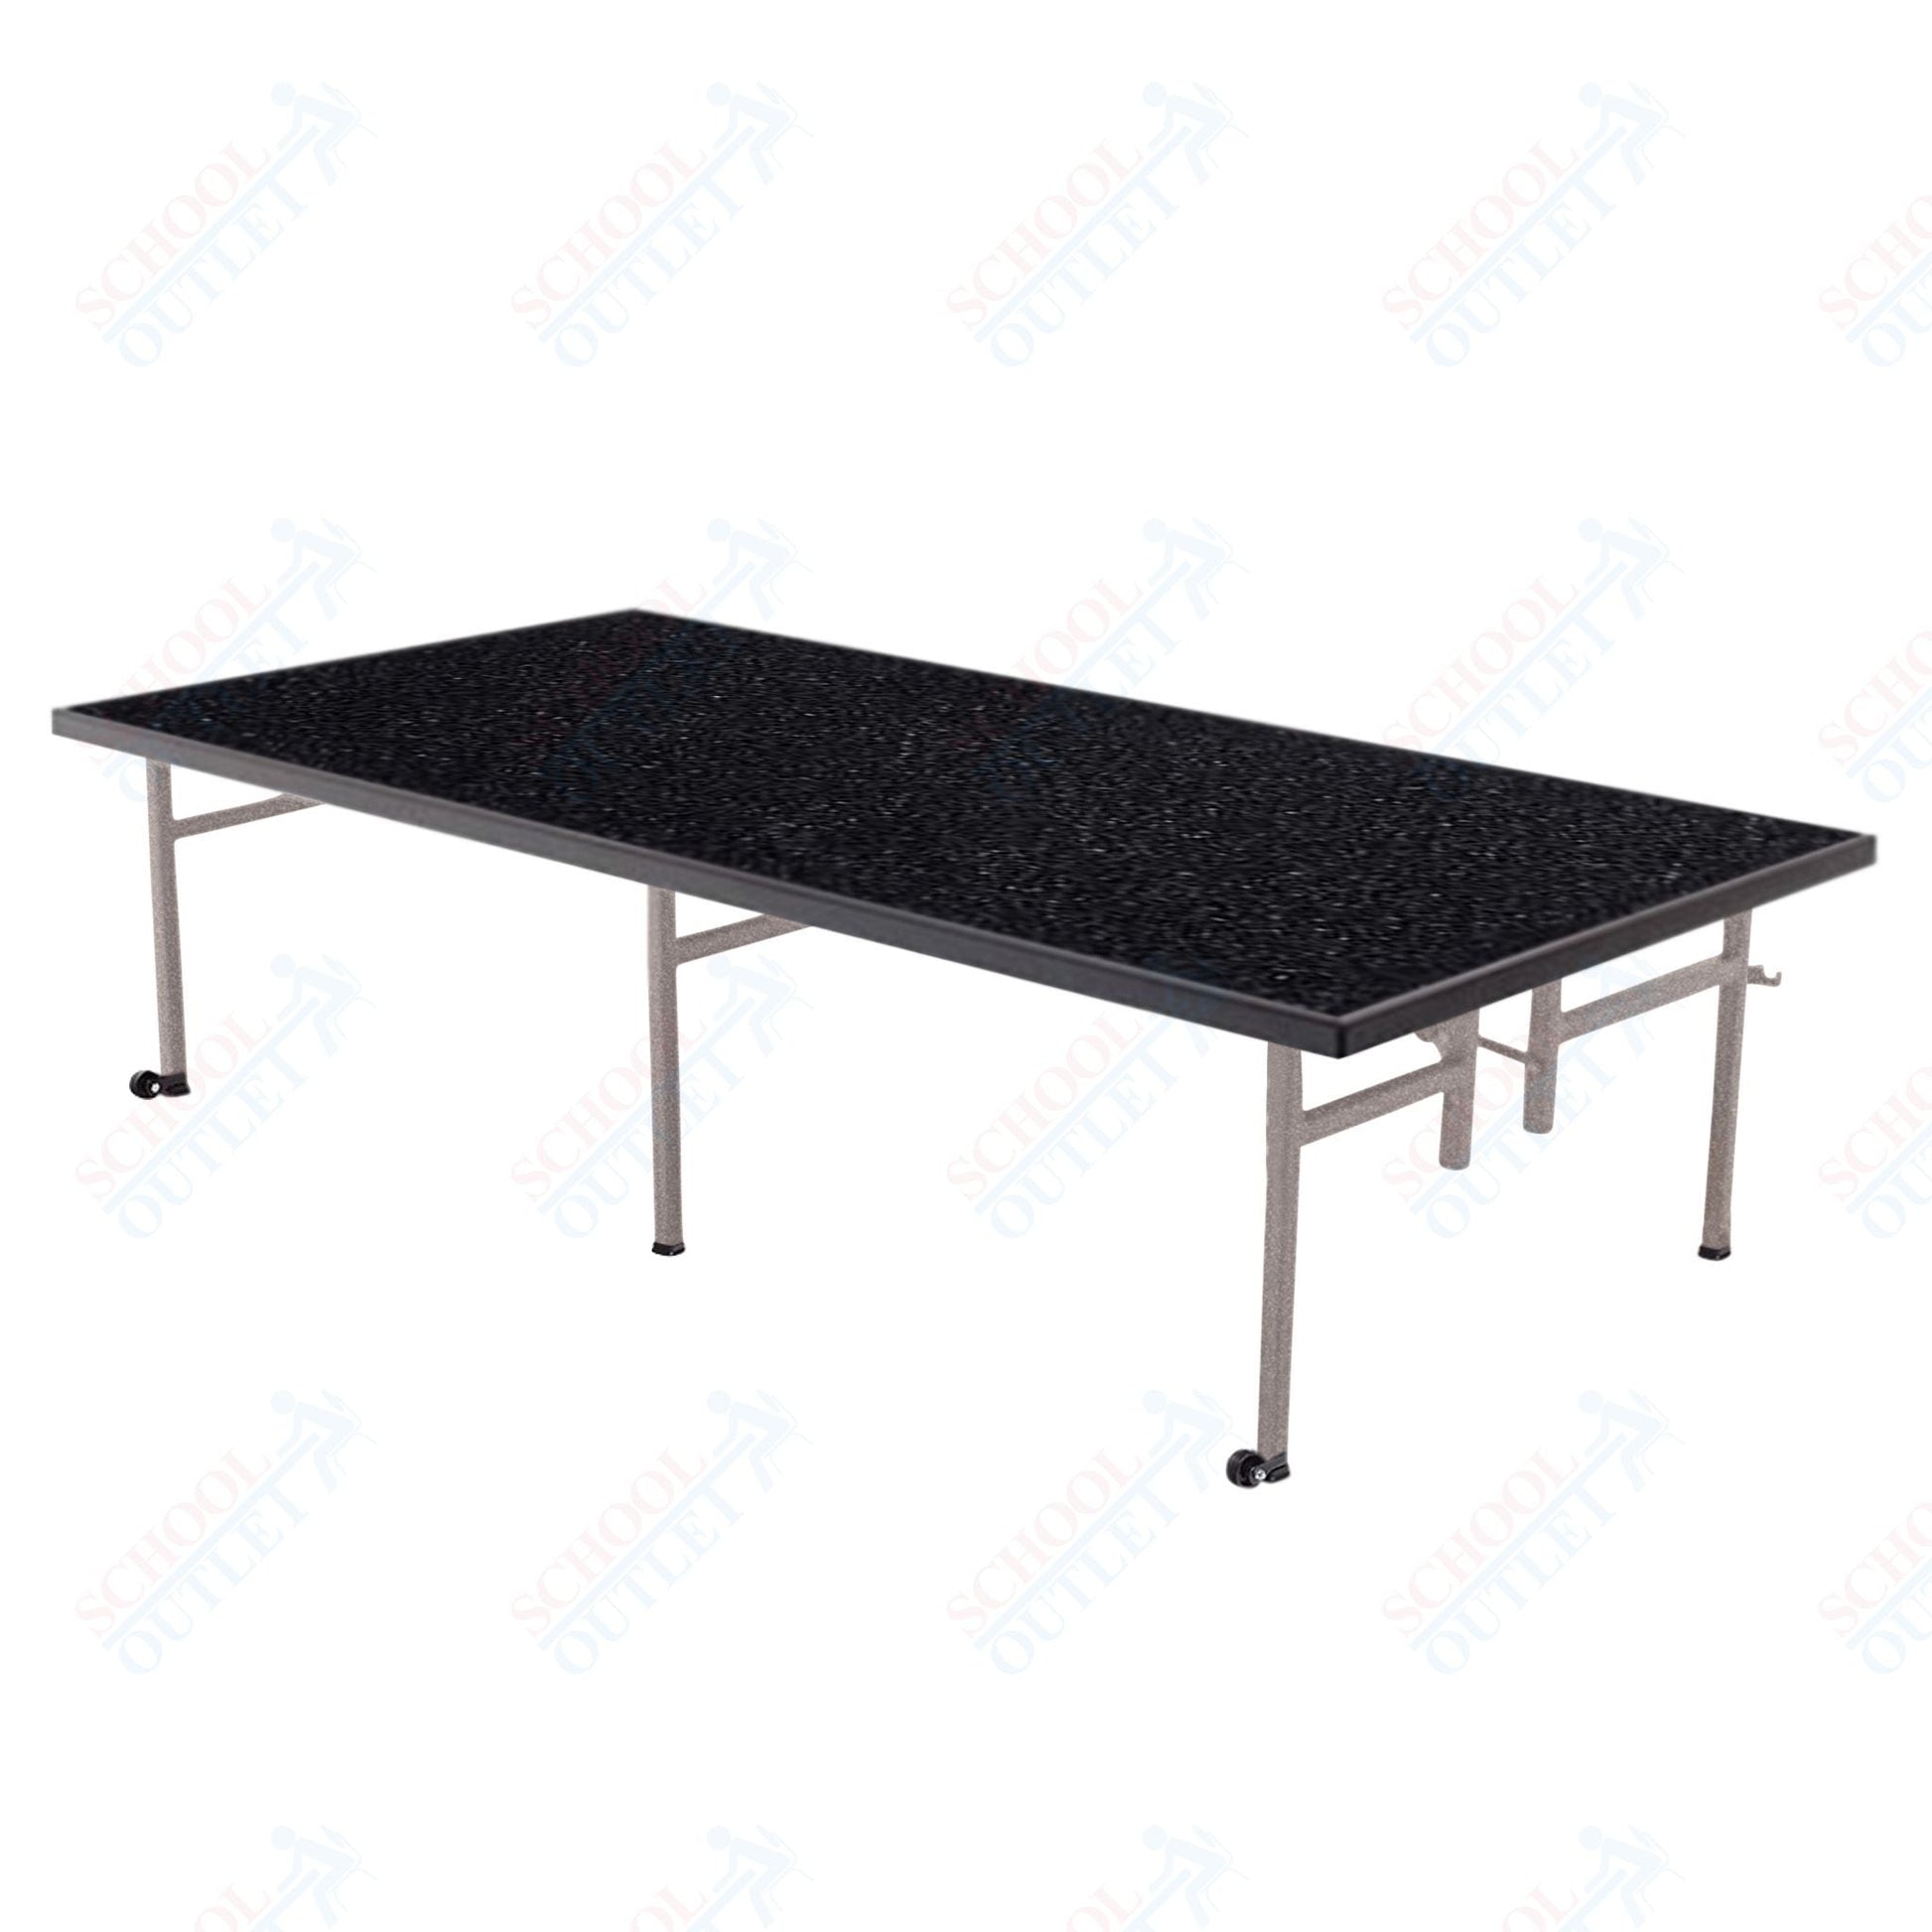 AmTab Fixed Height Stage - Carpet Top - 36"W x 96"L x 24"H (AmTab AMT - ST3824C) - SchoolOutlet